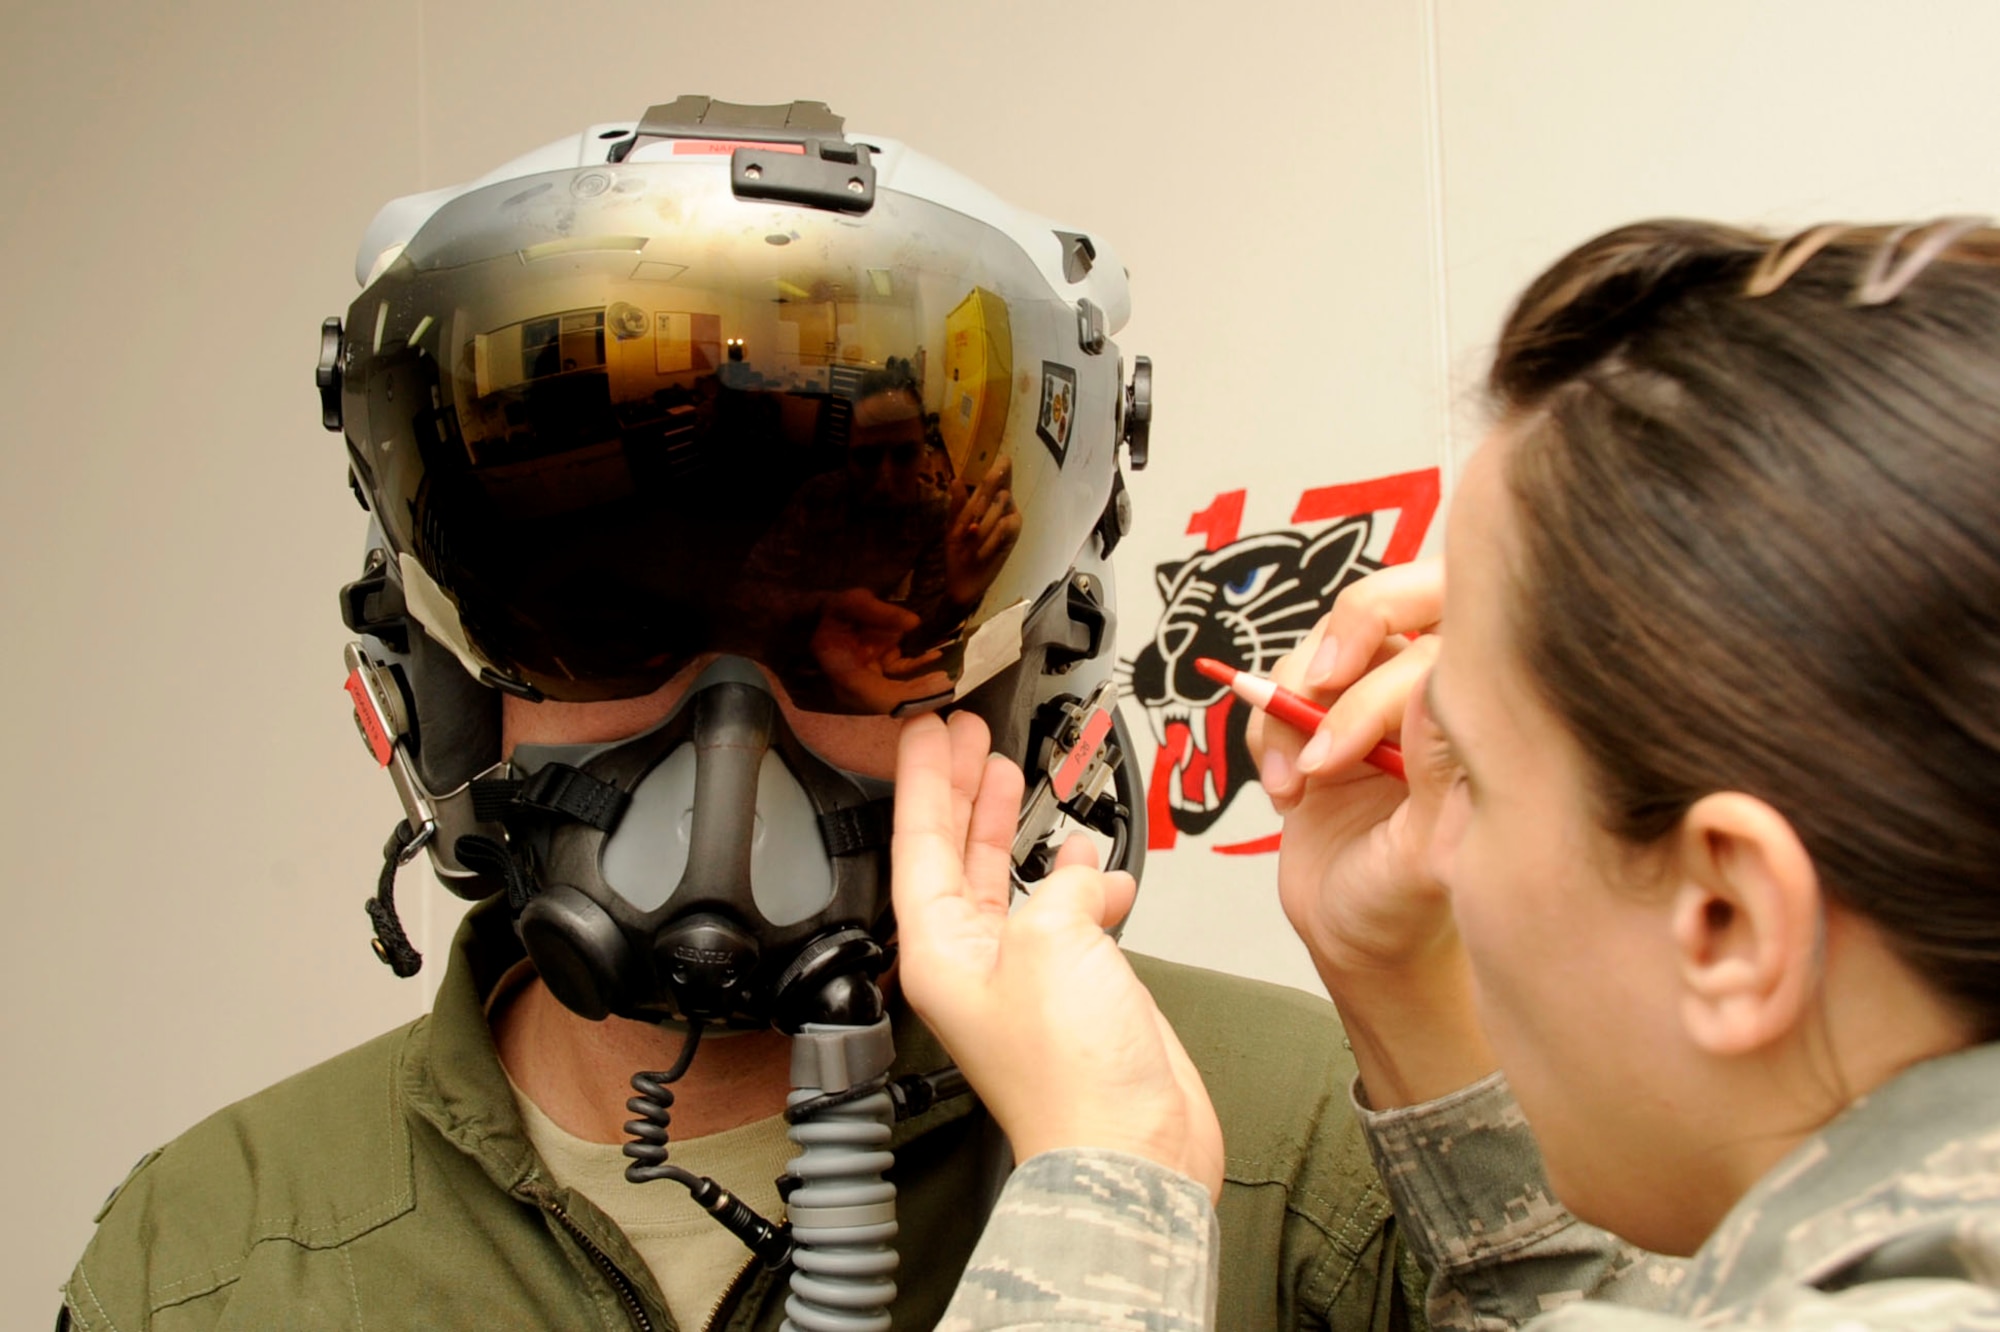 U.S. Air Force Senior Airman Courtney Maleport, 35th Operations Support Squadron aircrew flight equipment technician, makes adjustments to Capt. Christopher Nations’, 13th Fighter Squadron pilot, helmet at Misawa Air Base, Japan, March 14, 2013. AFE airmen are responsible for function checking helmets, parachutes, floatation devices, and other emergency protective equipment. Not only do they test every piece of equipment pilots use during flight or in an emergency scenario, they maintain and inspect them regularly. (U.S. Air Force photo by Airman 1st Class Kenna Jackson)